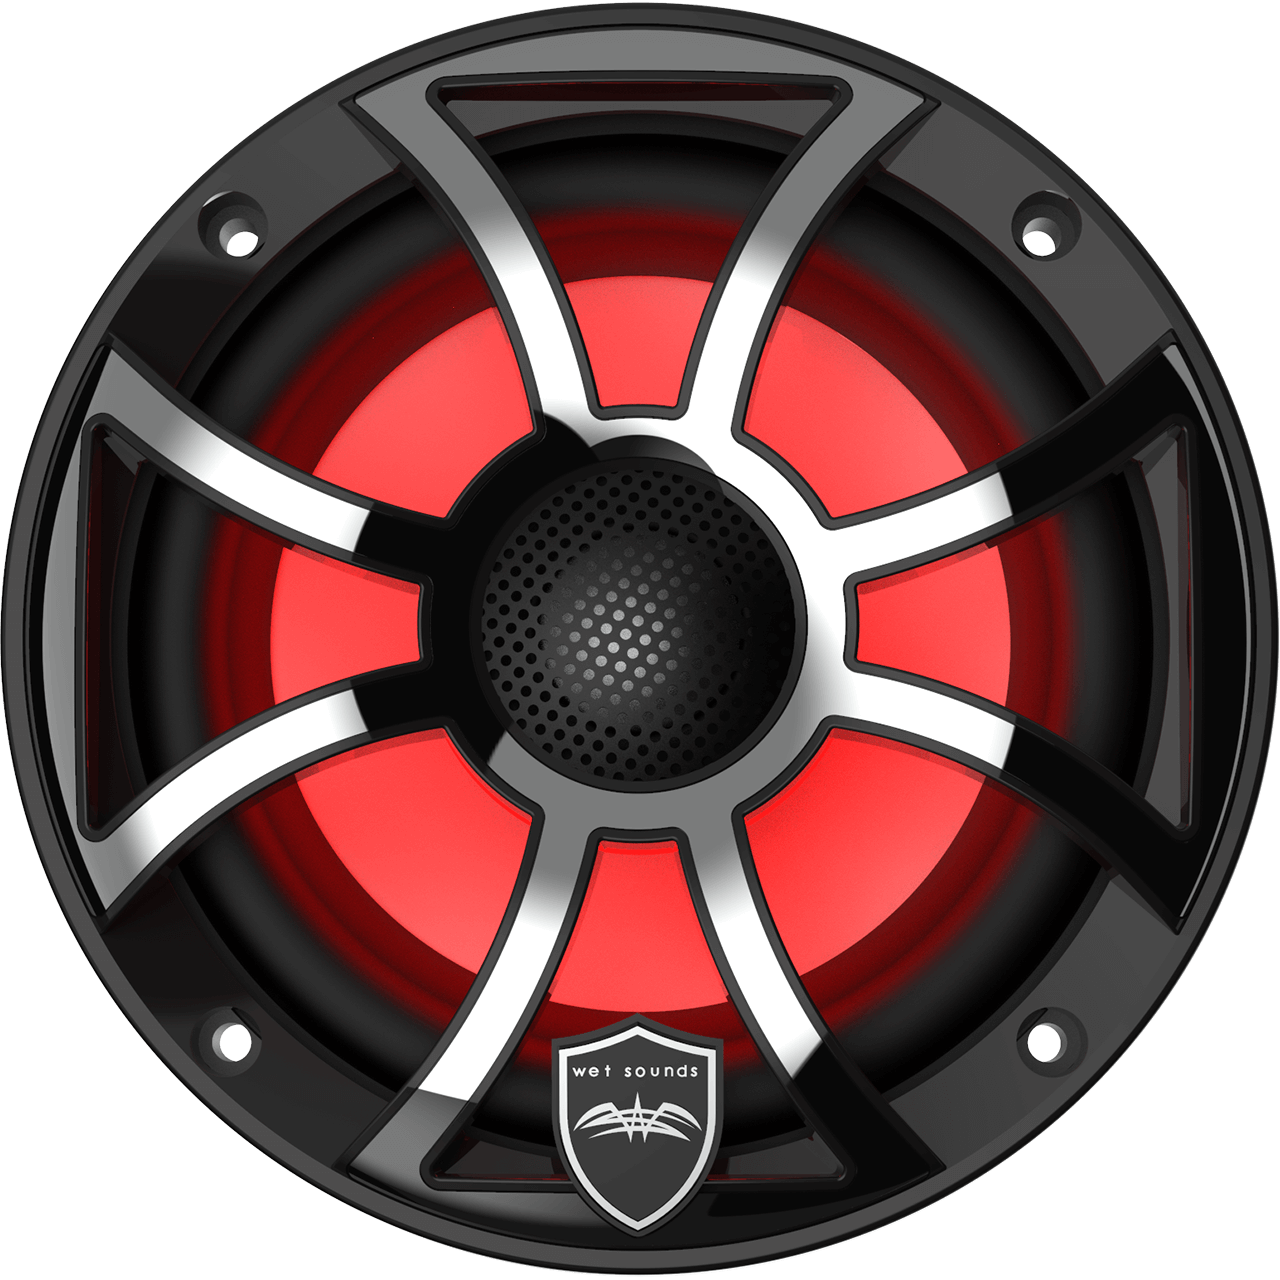 REVO 6-XS-B-SS Black XS / Stainless Overlay Grille 6.5” Coaxial Speakers (pair)